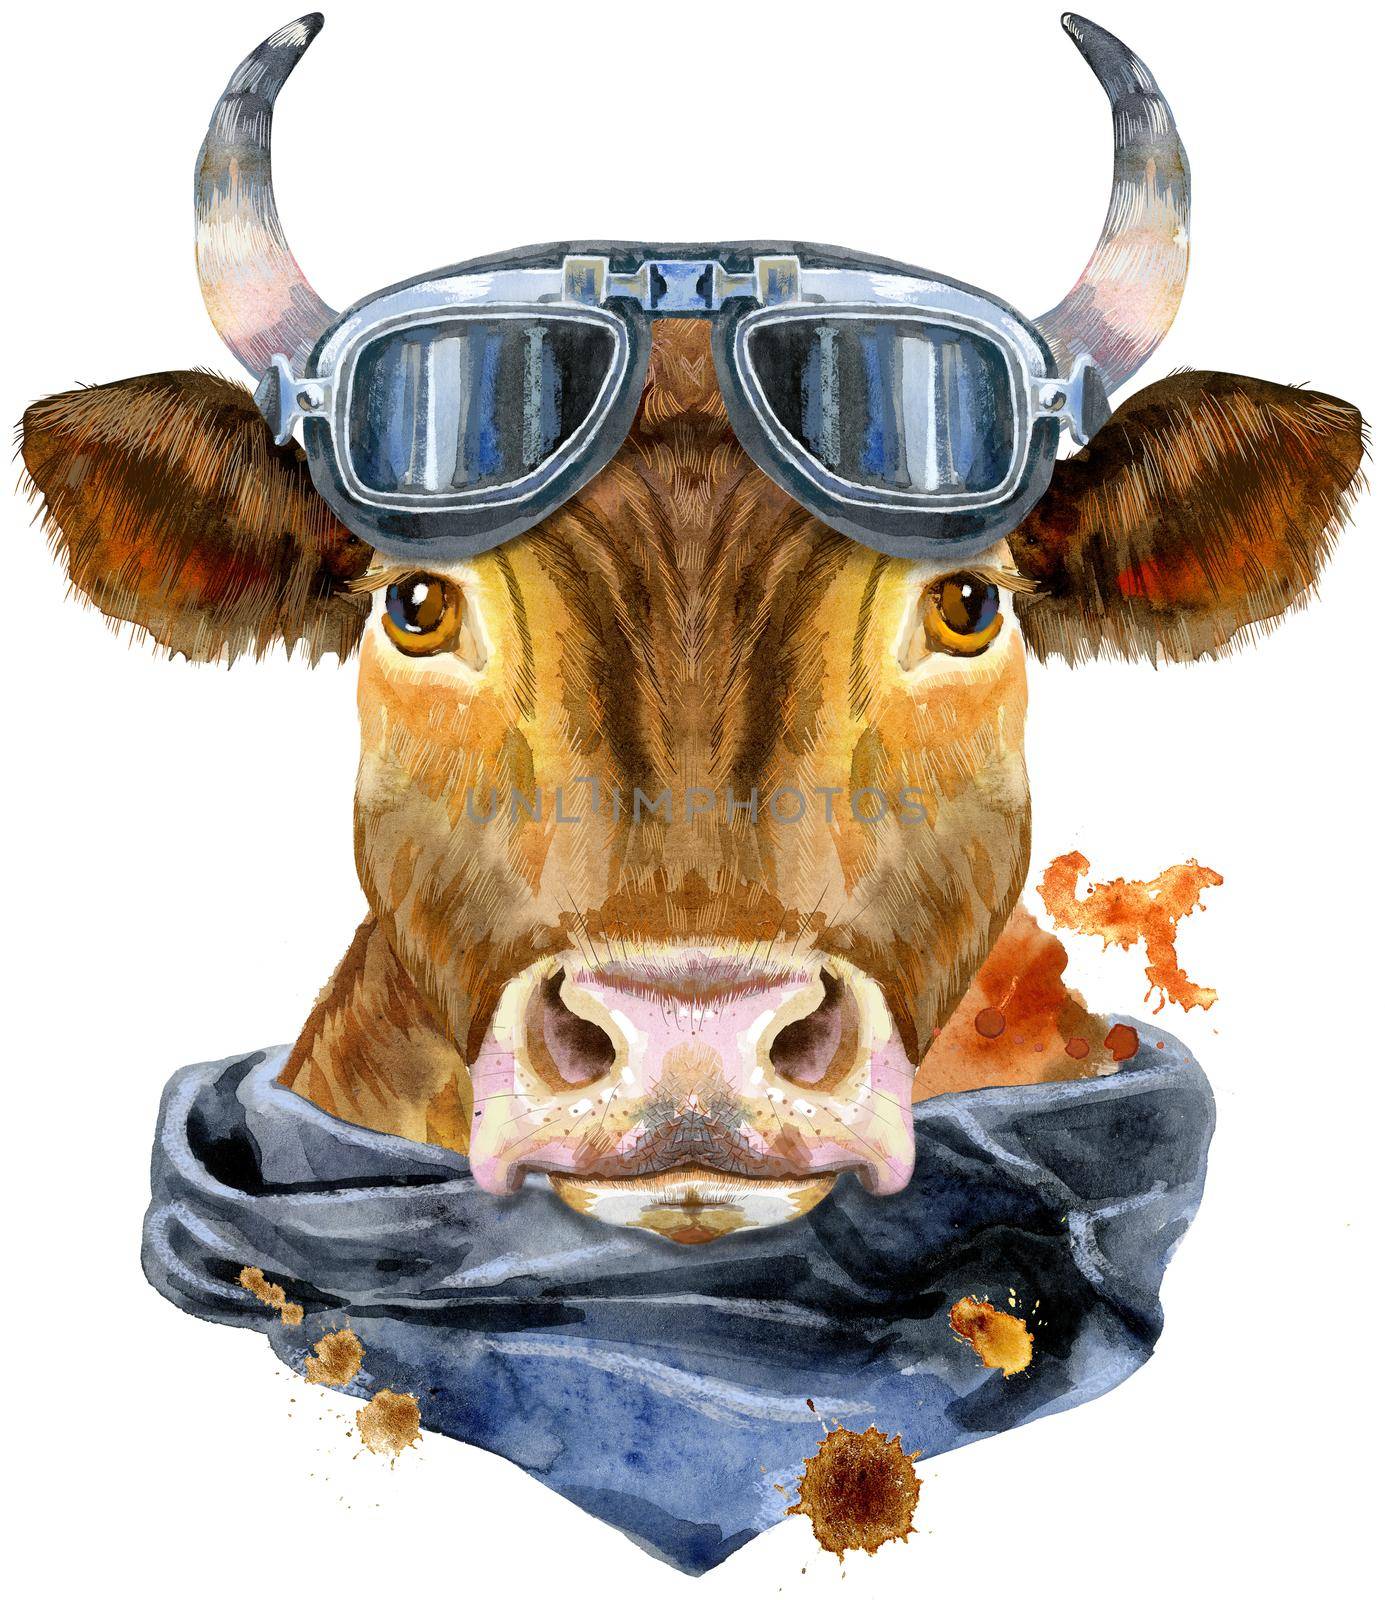 Bull watercolor graphics. Bull with biker sunglasses and handkerchief animal illustration with splash watercolor textured background.